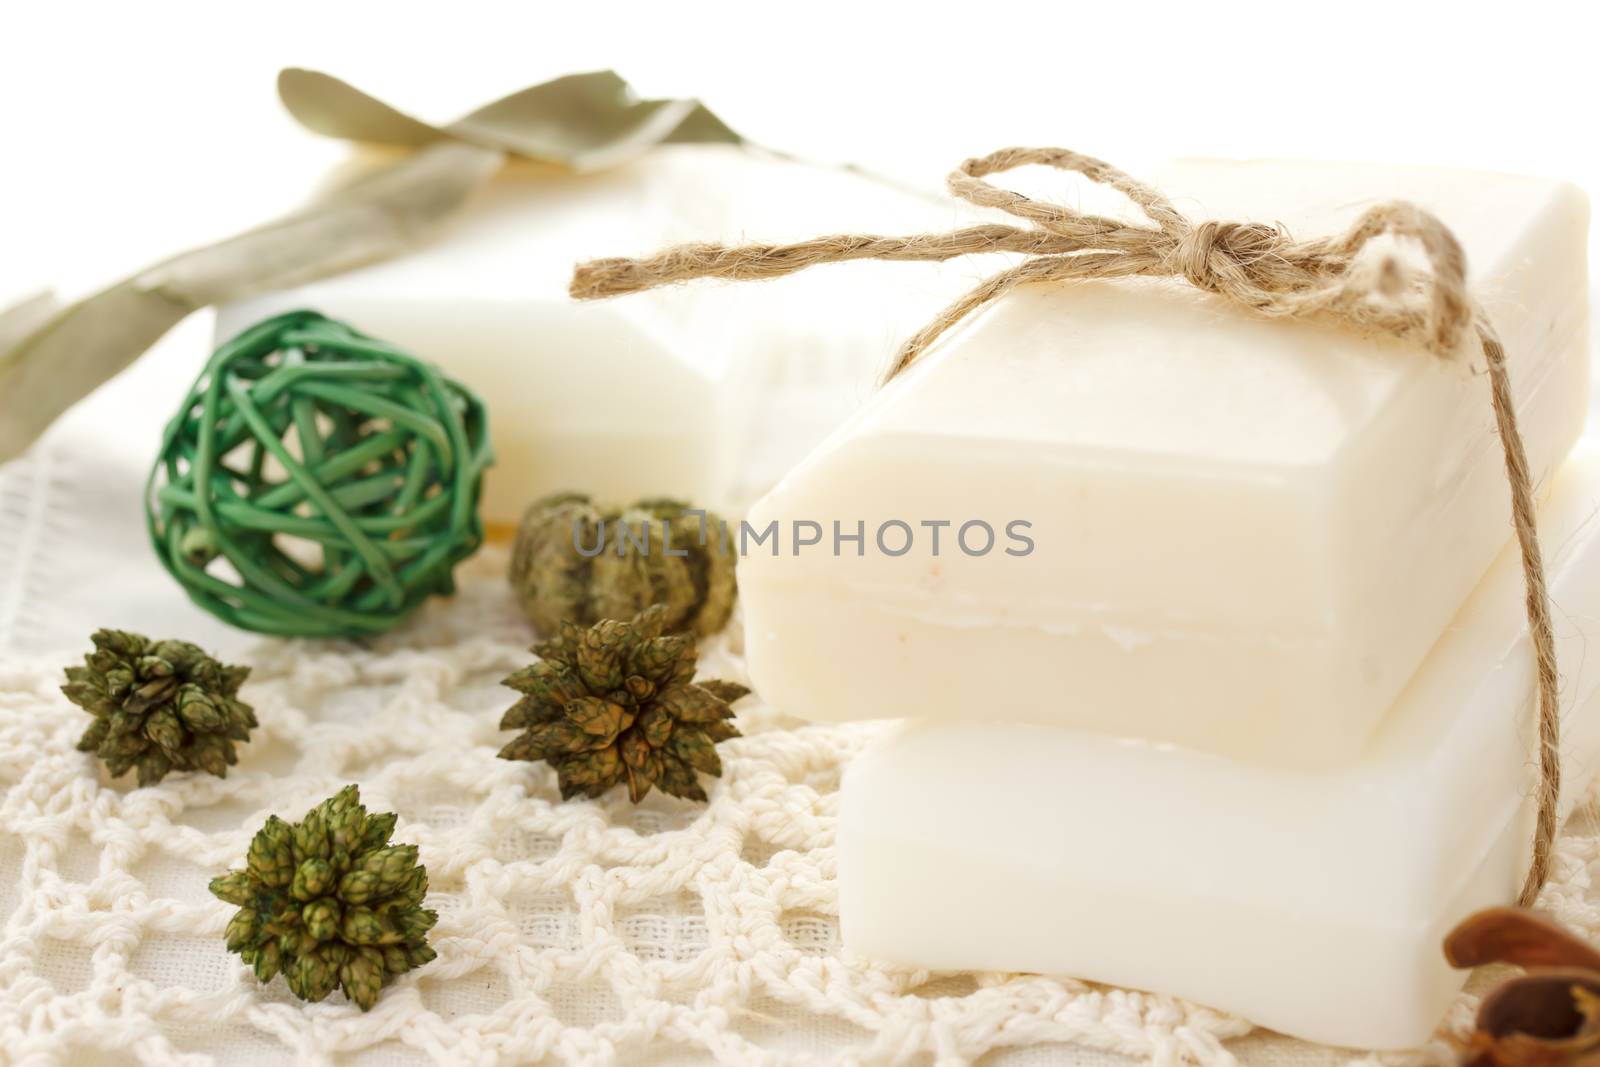 Bars of soap with green potpourris